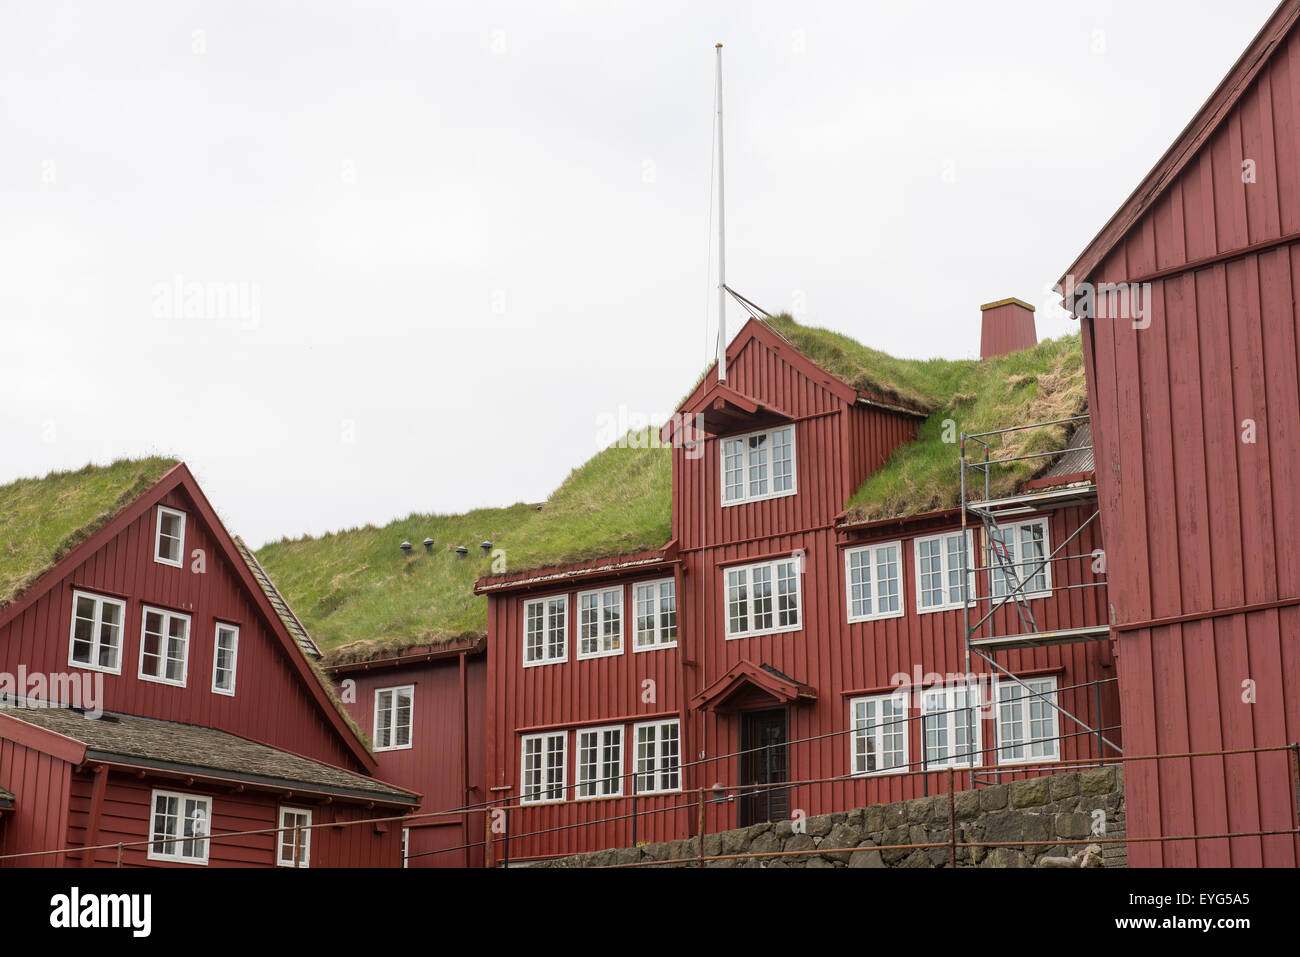 Tinganes, the old town of Torshavn with red old wooden houses Stock Photo